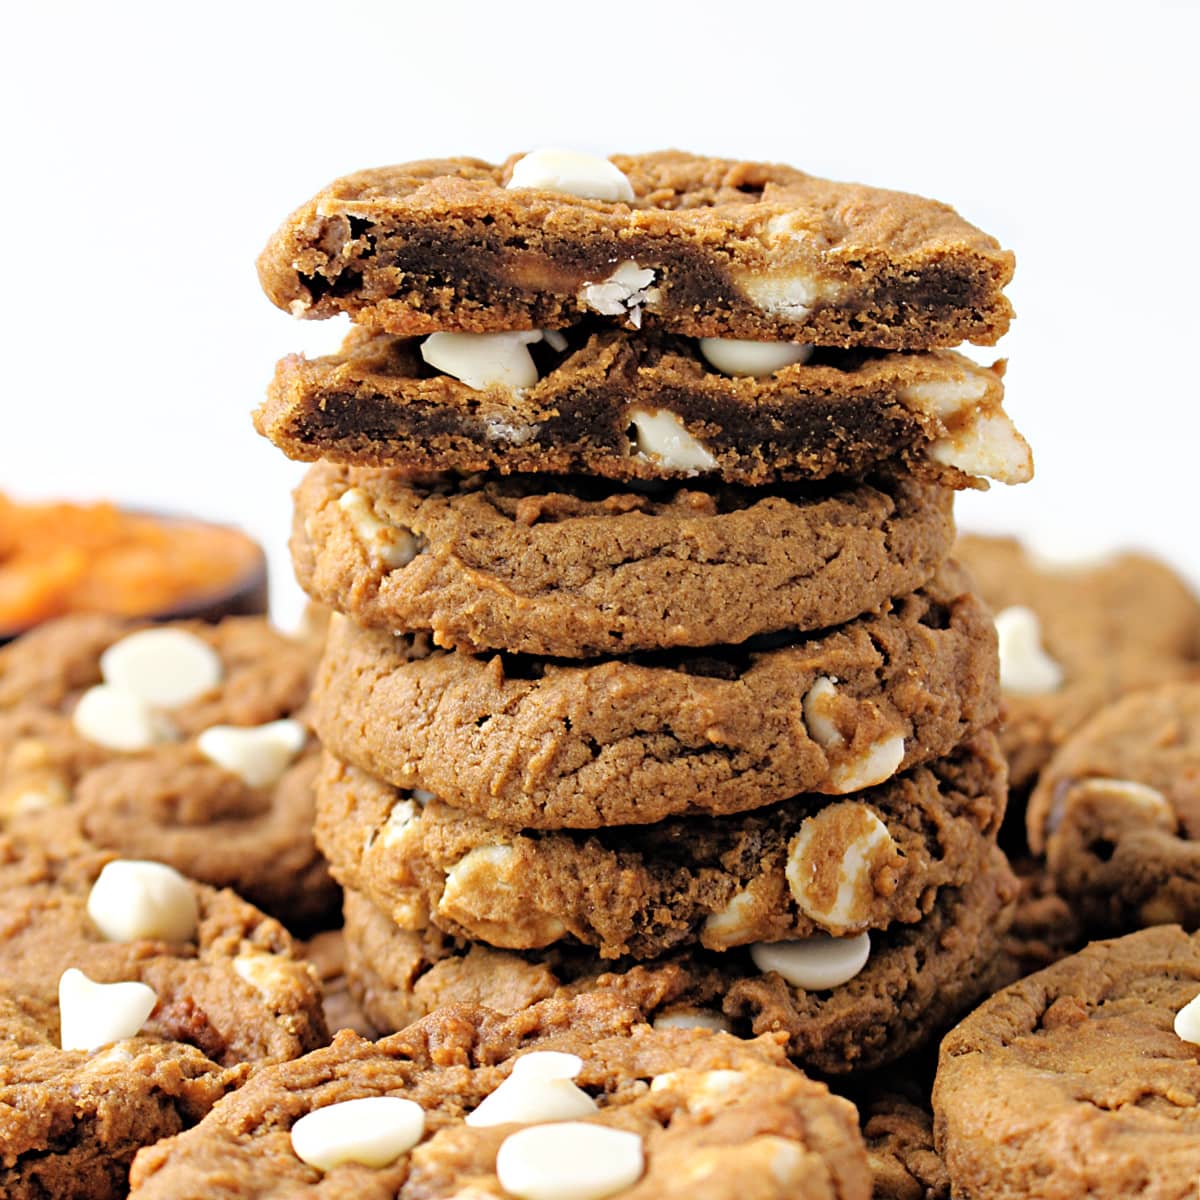 Stack of pumpkin cookies with cut open cookie on top showing dense, chewy interior.